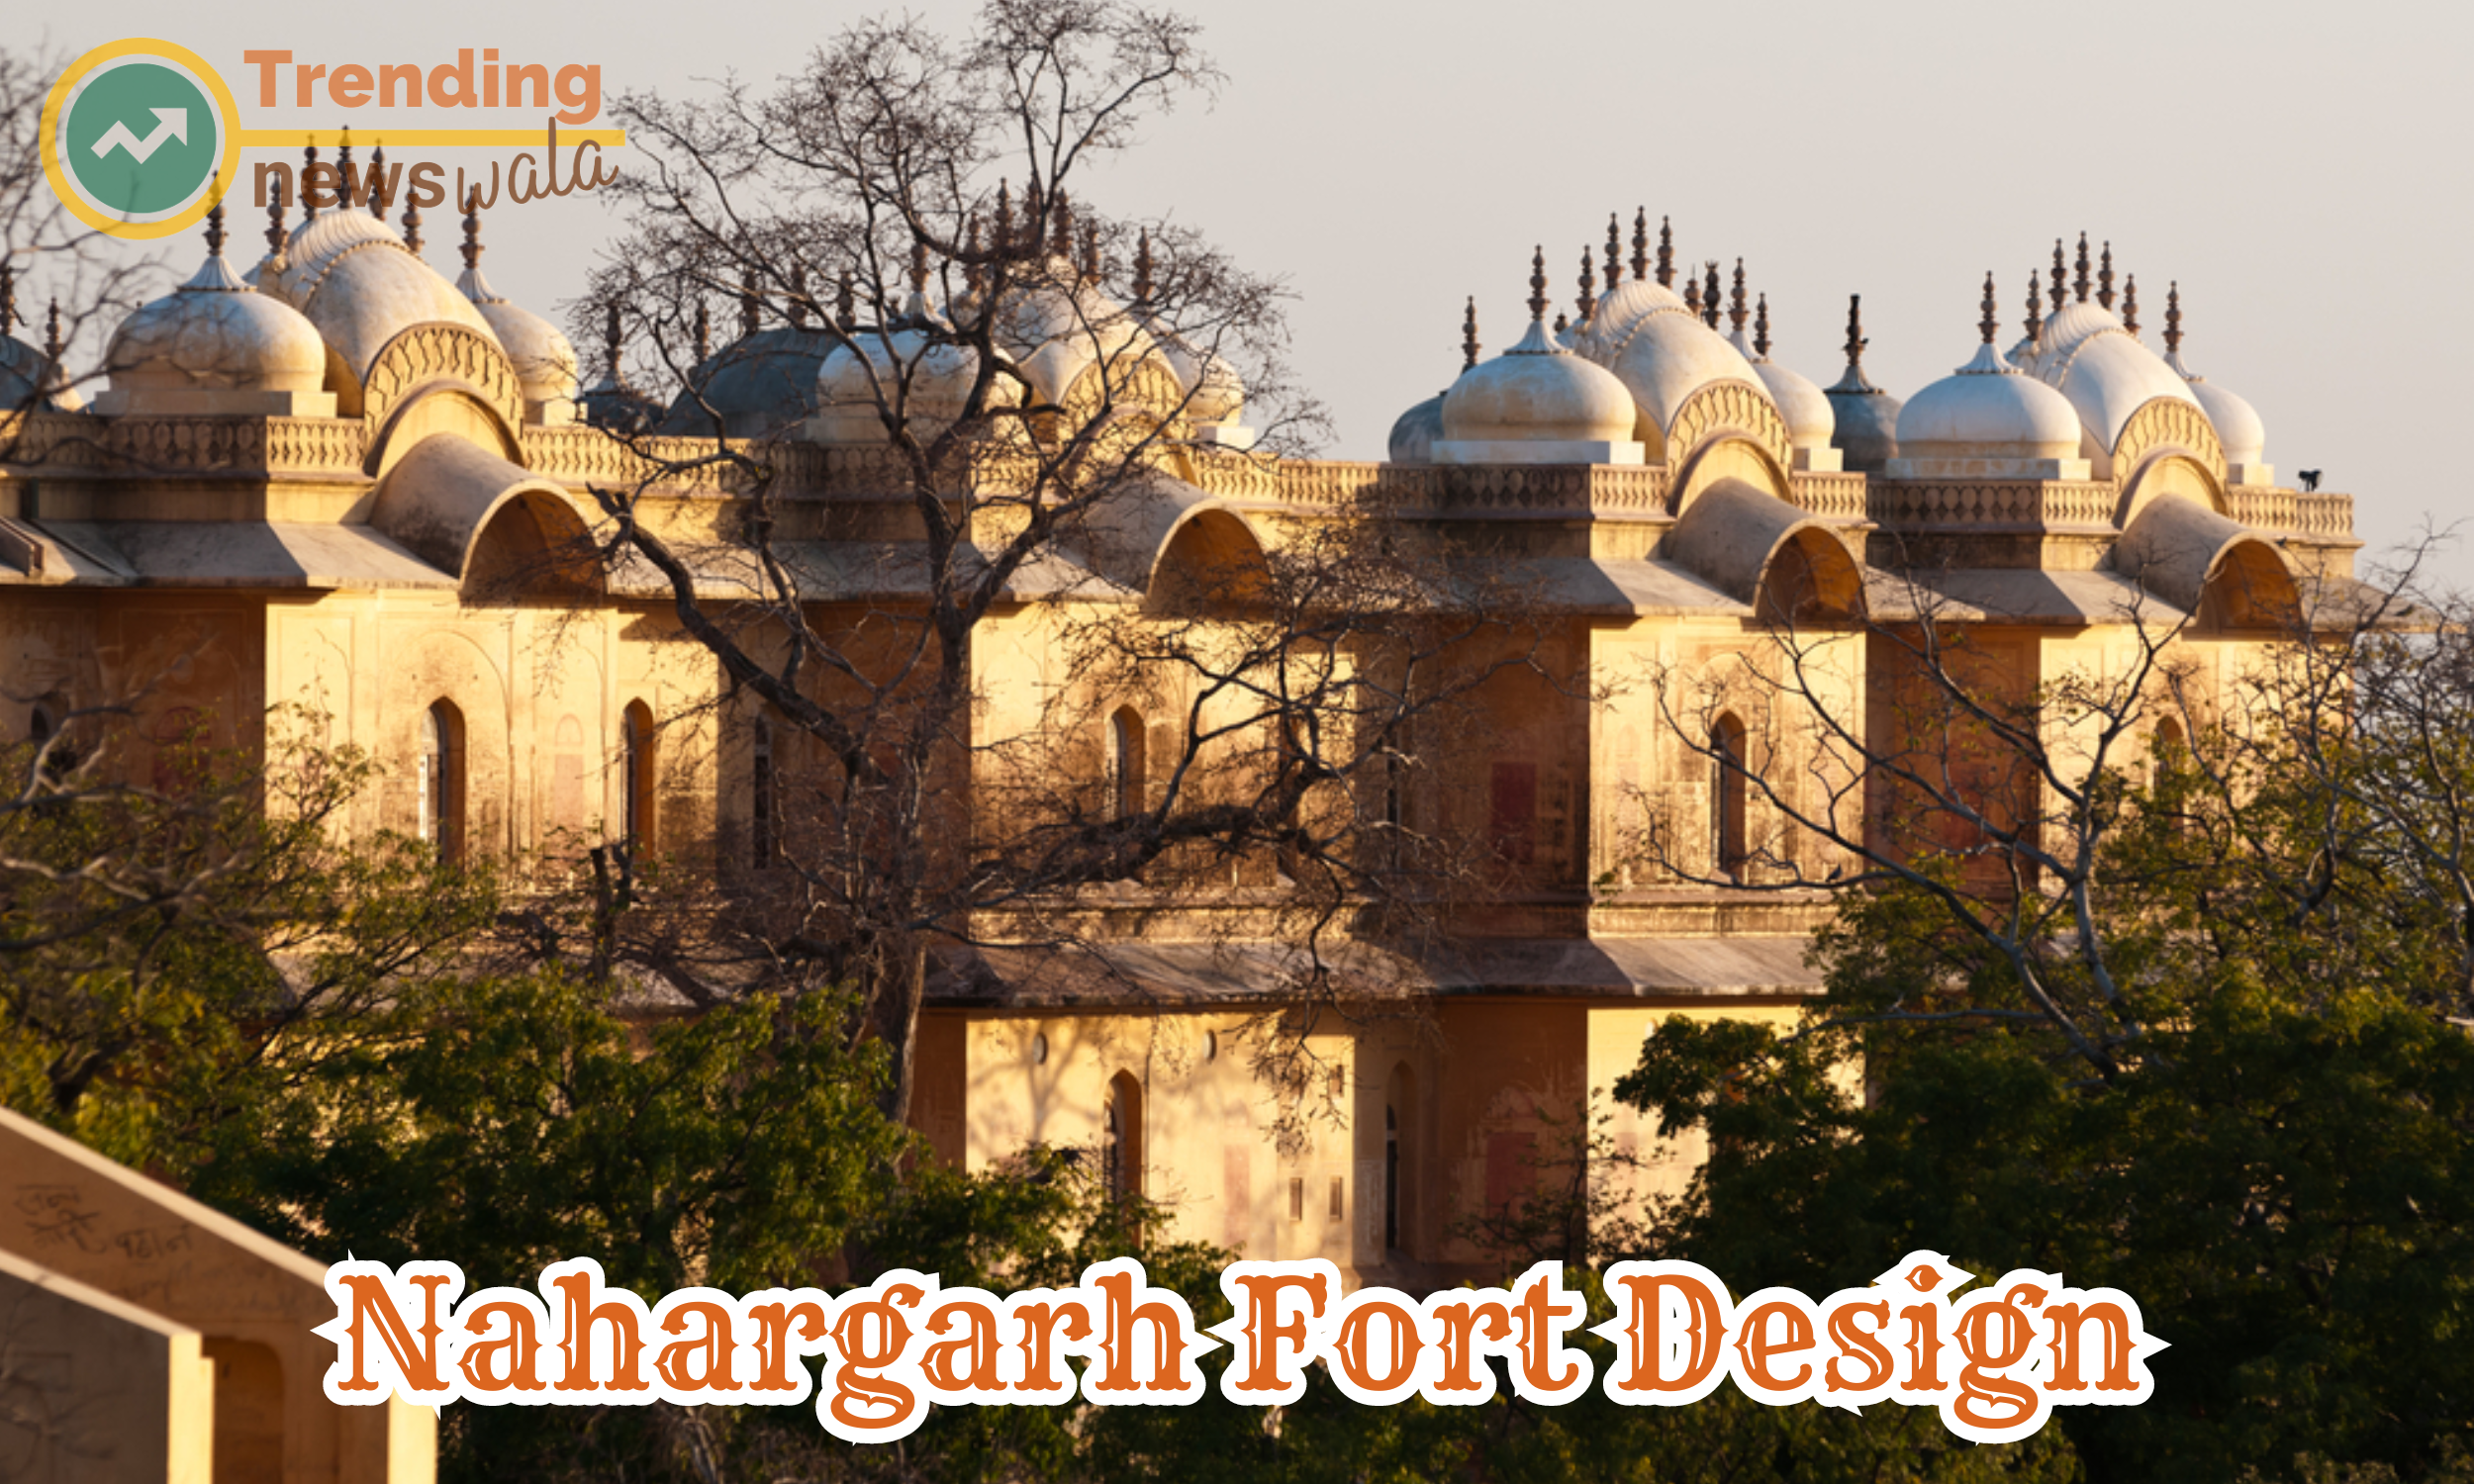 Nahargarh Fort is a historic fortress located on the Aravalli hills